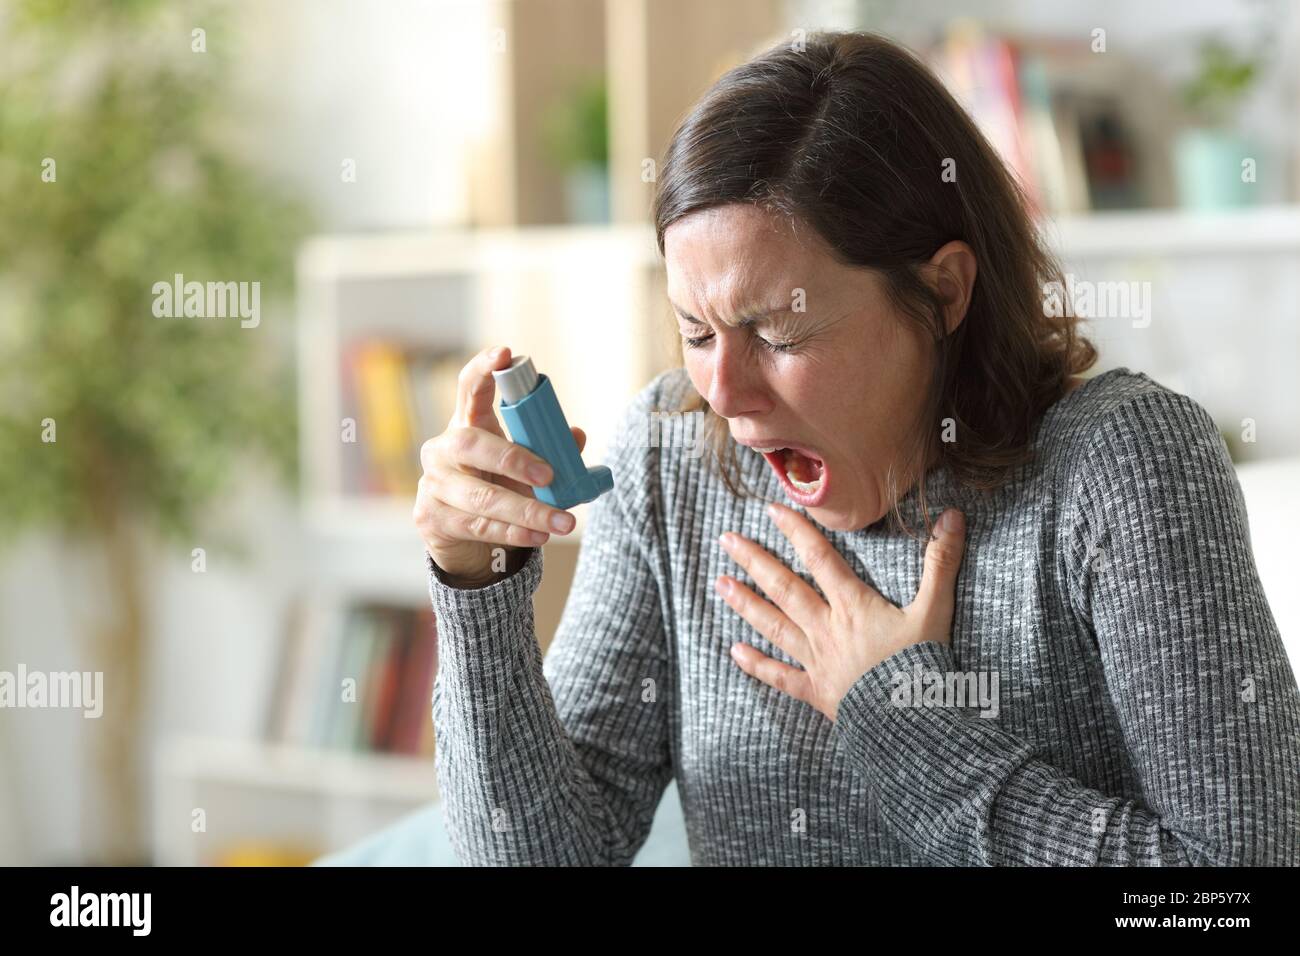 Asthmatic adult woman suffers asthma attack holding inhaler sitting on the couch at home Stock Photo